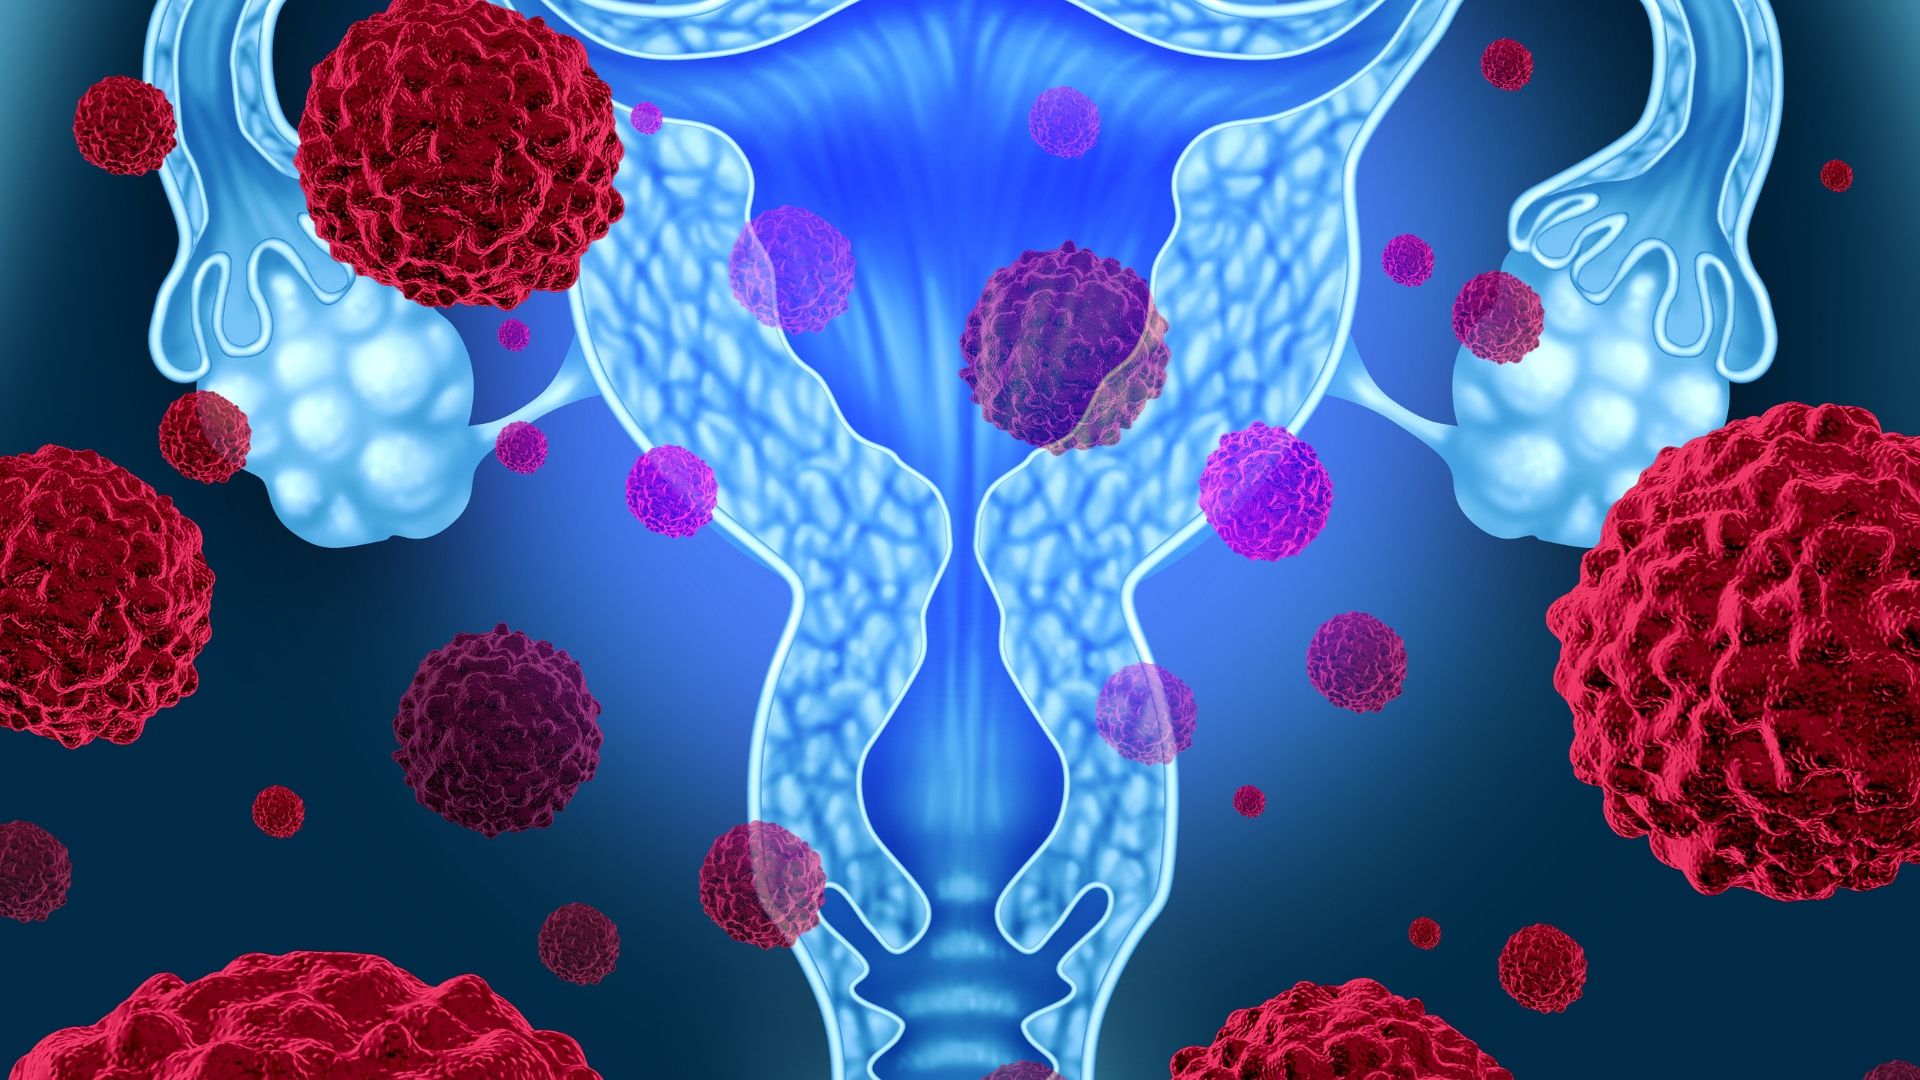 Uterine Fibroid Treatment: Medications and surgical options